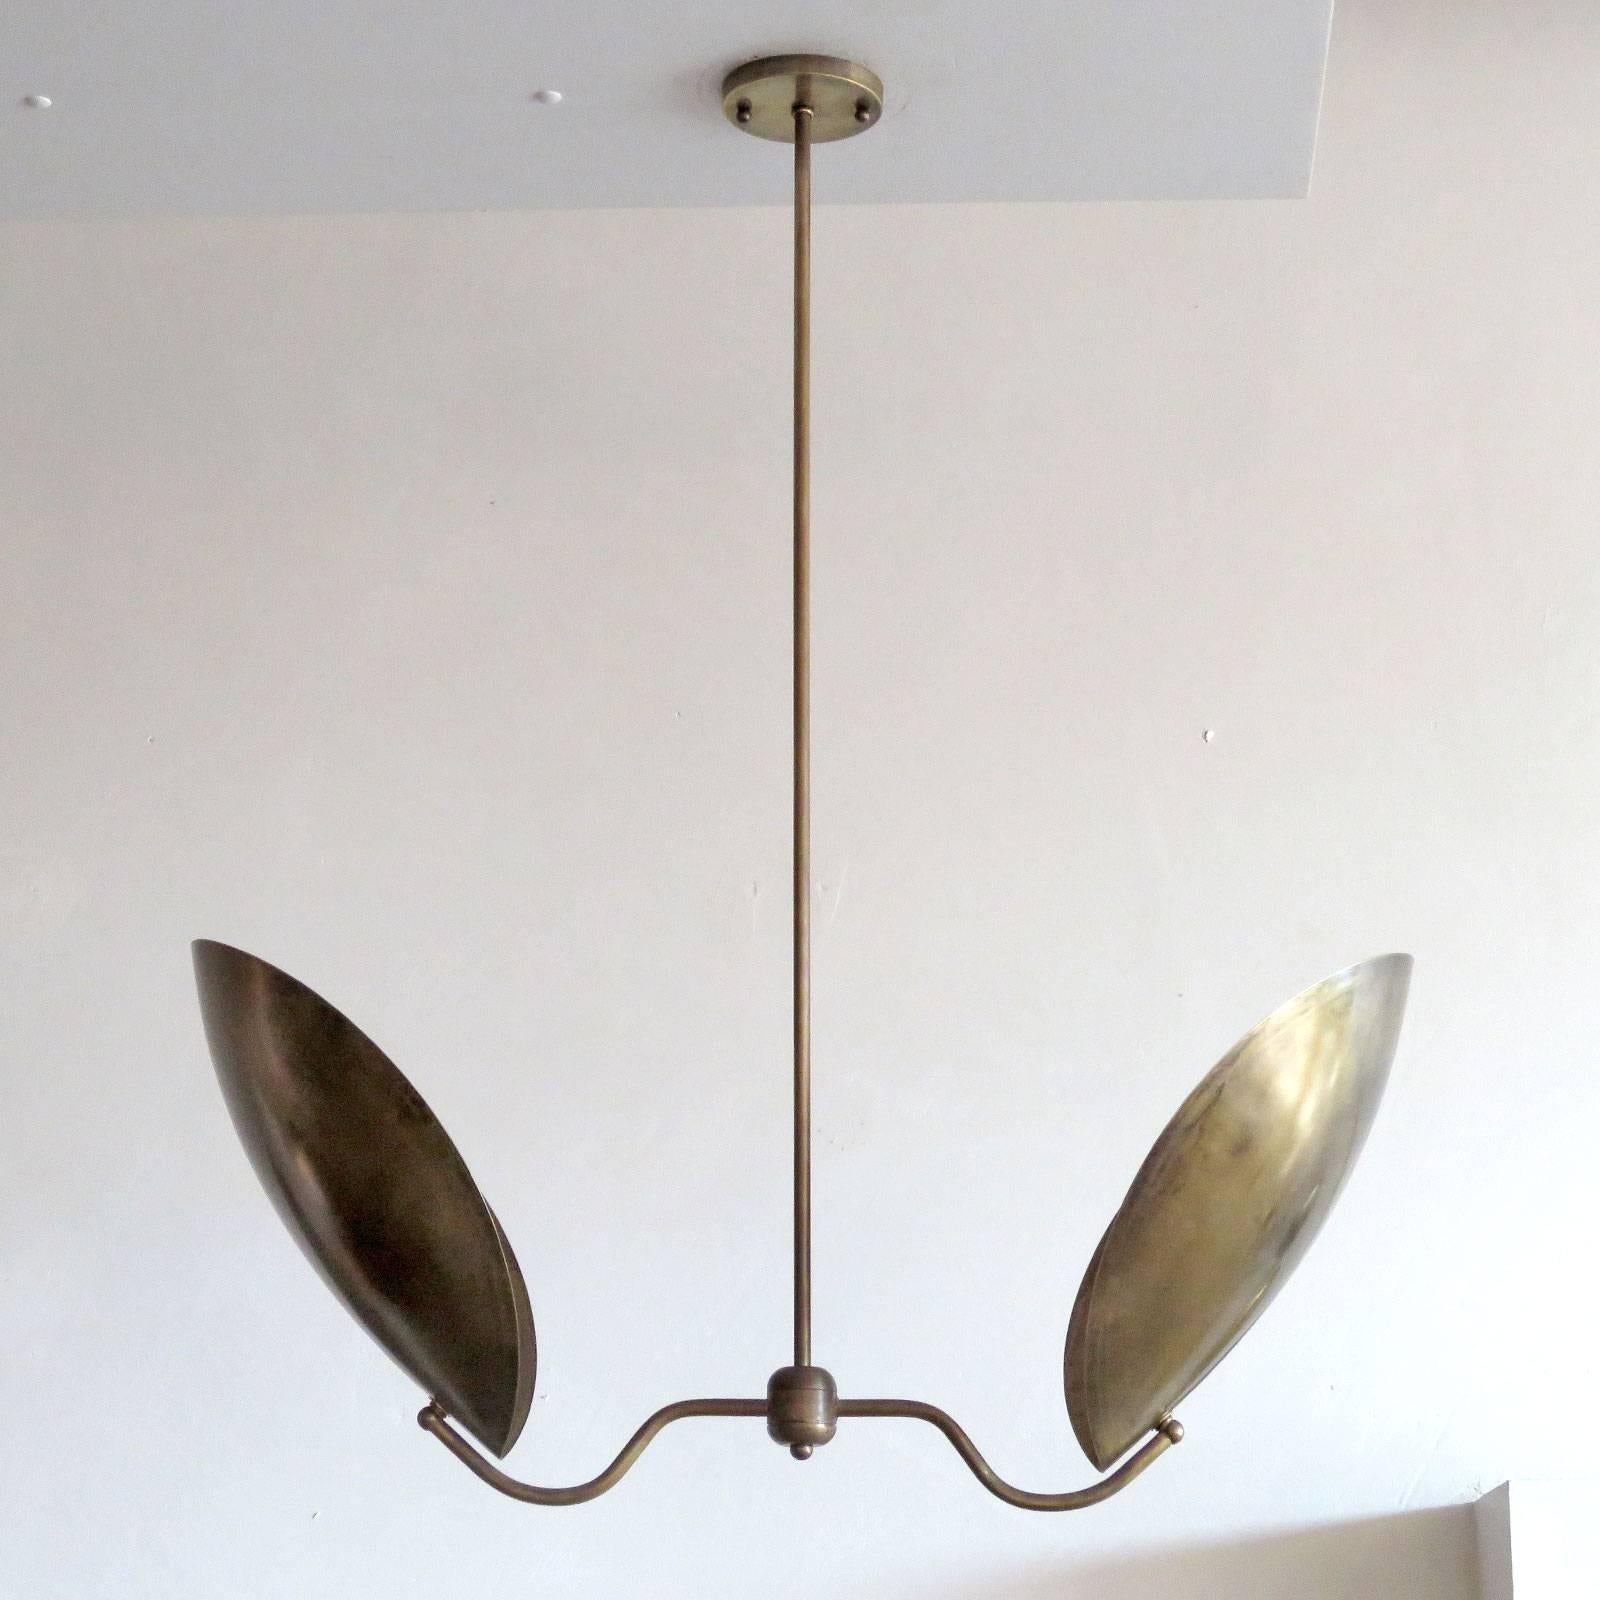 Elegant two shield pendant 'Chiton-2' by Gallery L7, reminiscent of stag beetle armor, in a raw brass finish, overall height can be customized. Two E26 sockets per fixture, max. wattage 60w each, wired for US standards or European standards